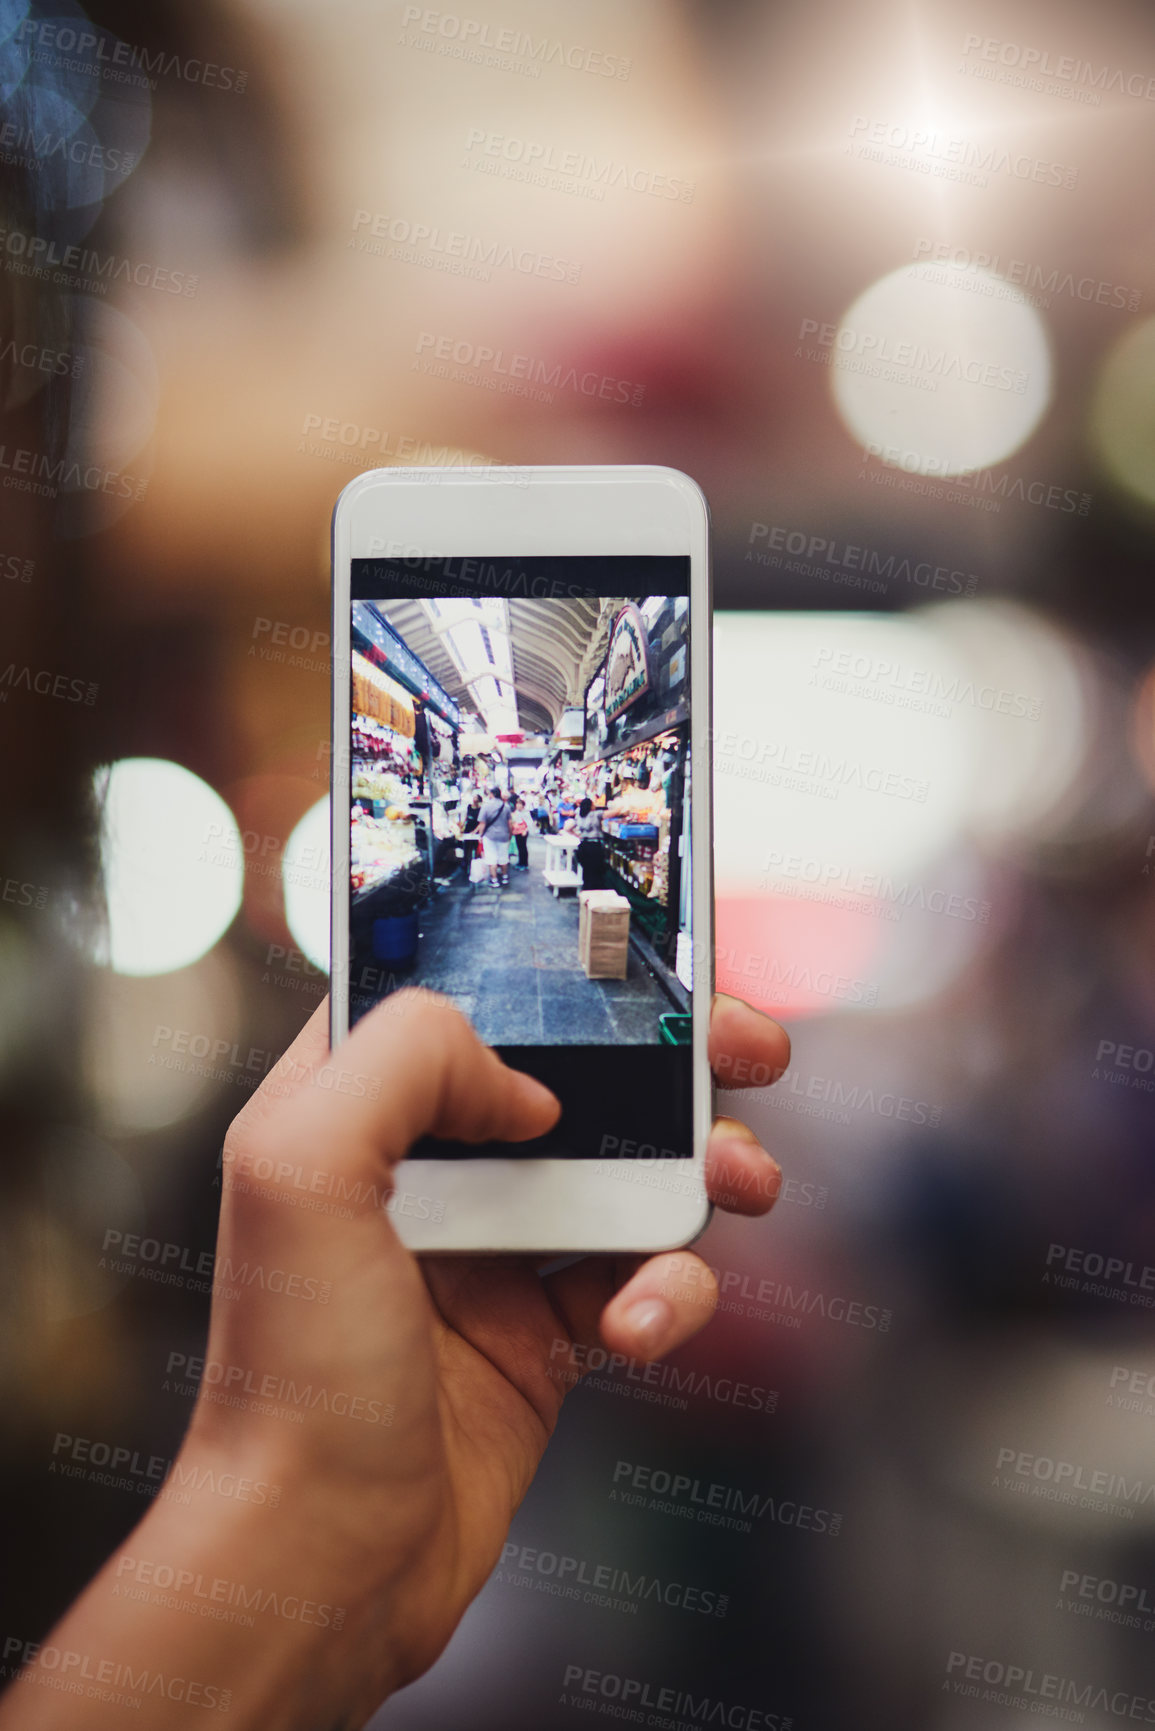 Buy stock photo Shot of an unrecognizable person's hand holding a cellphone and taking photos of a busy market outside during the day